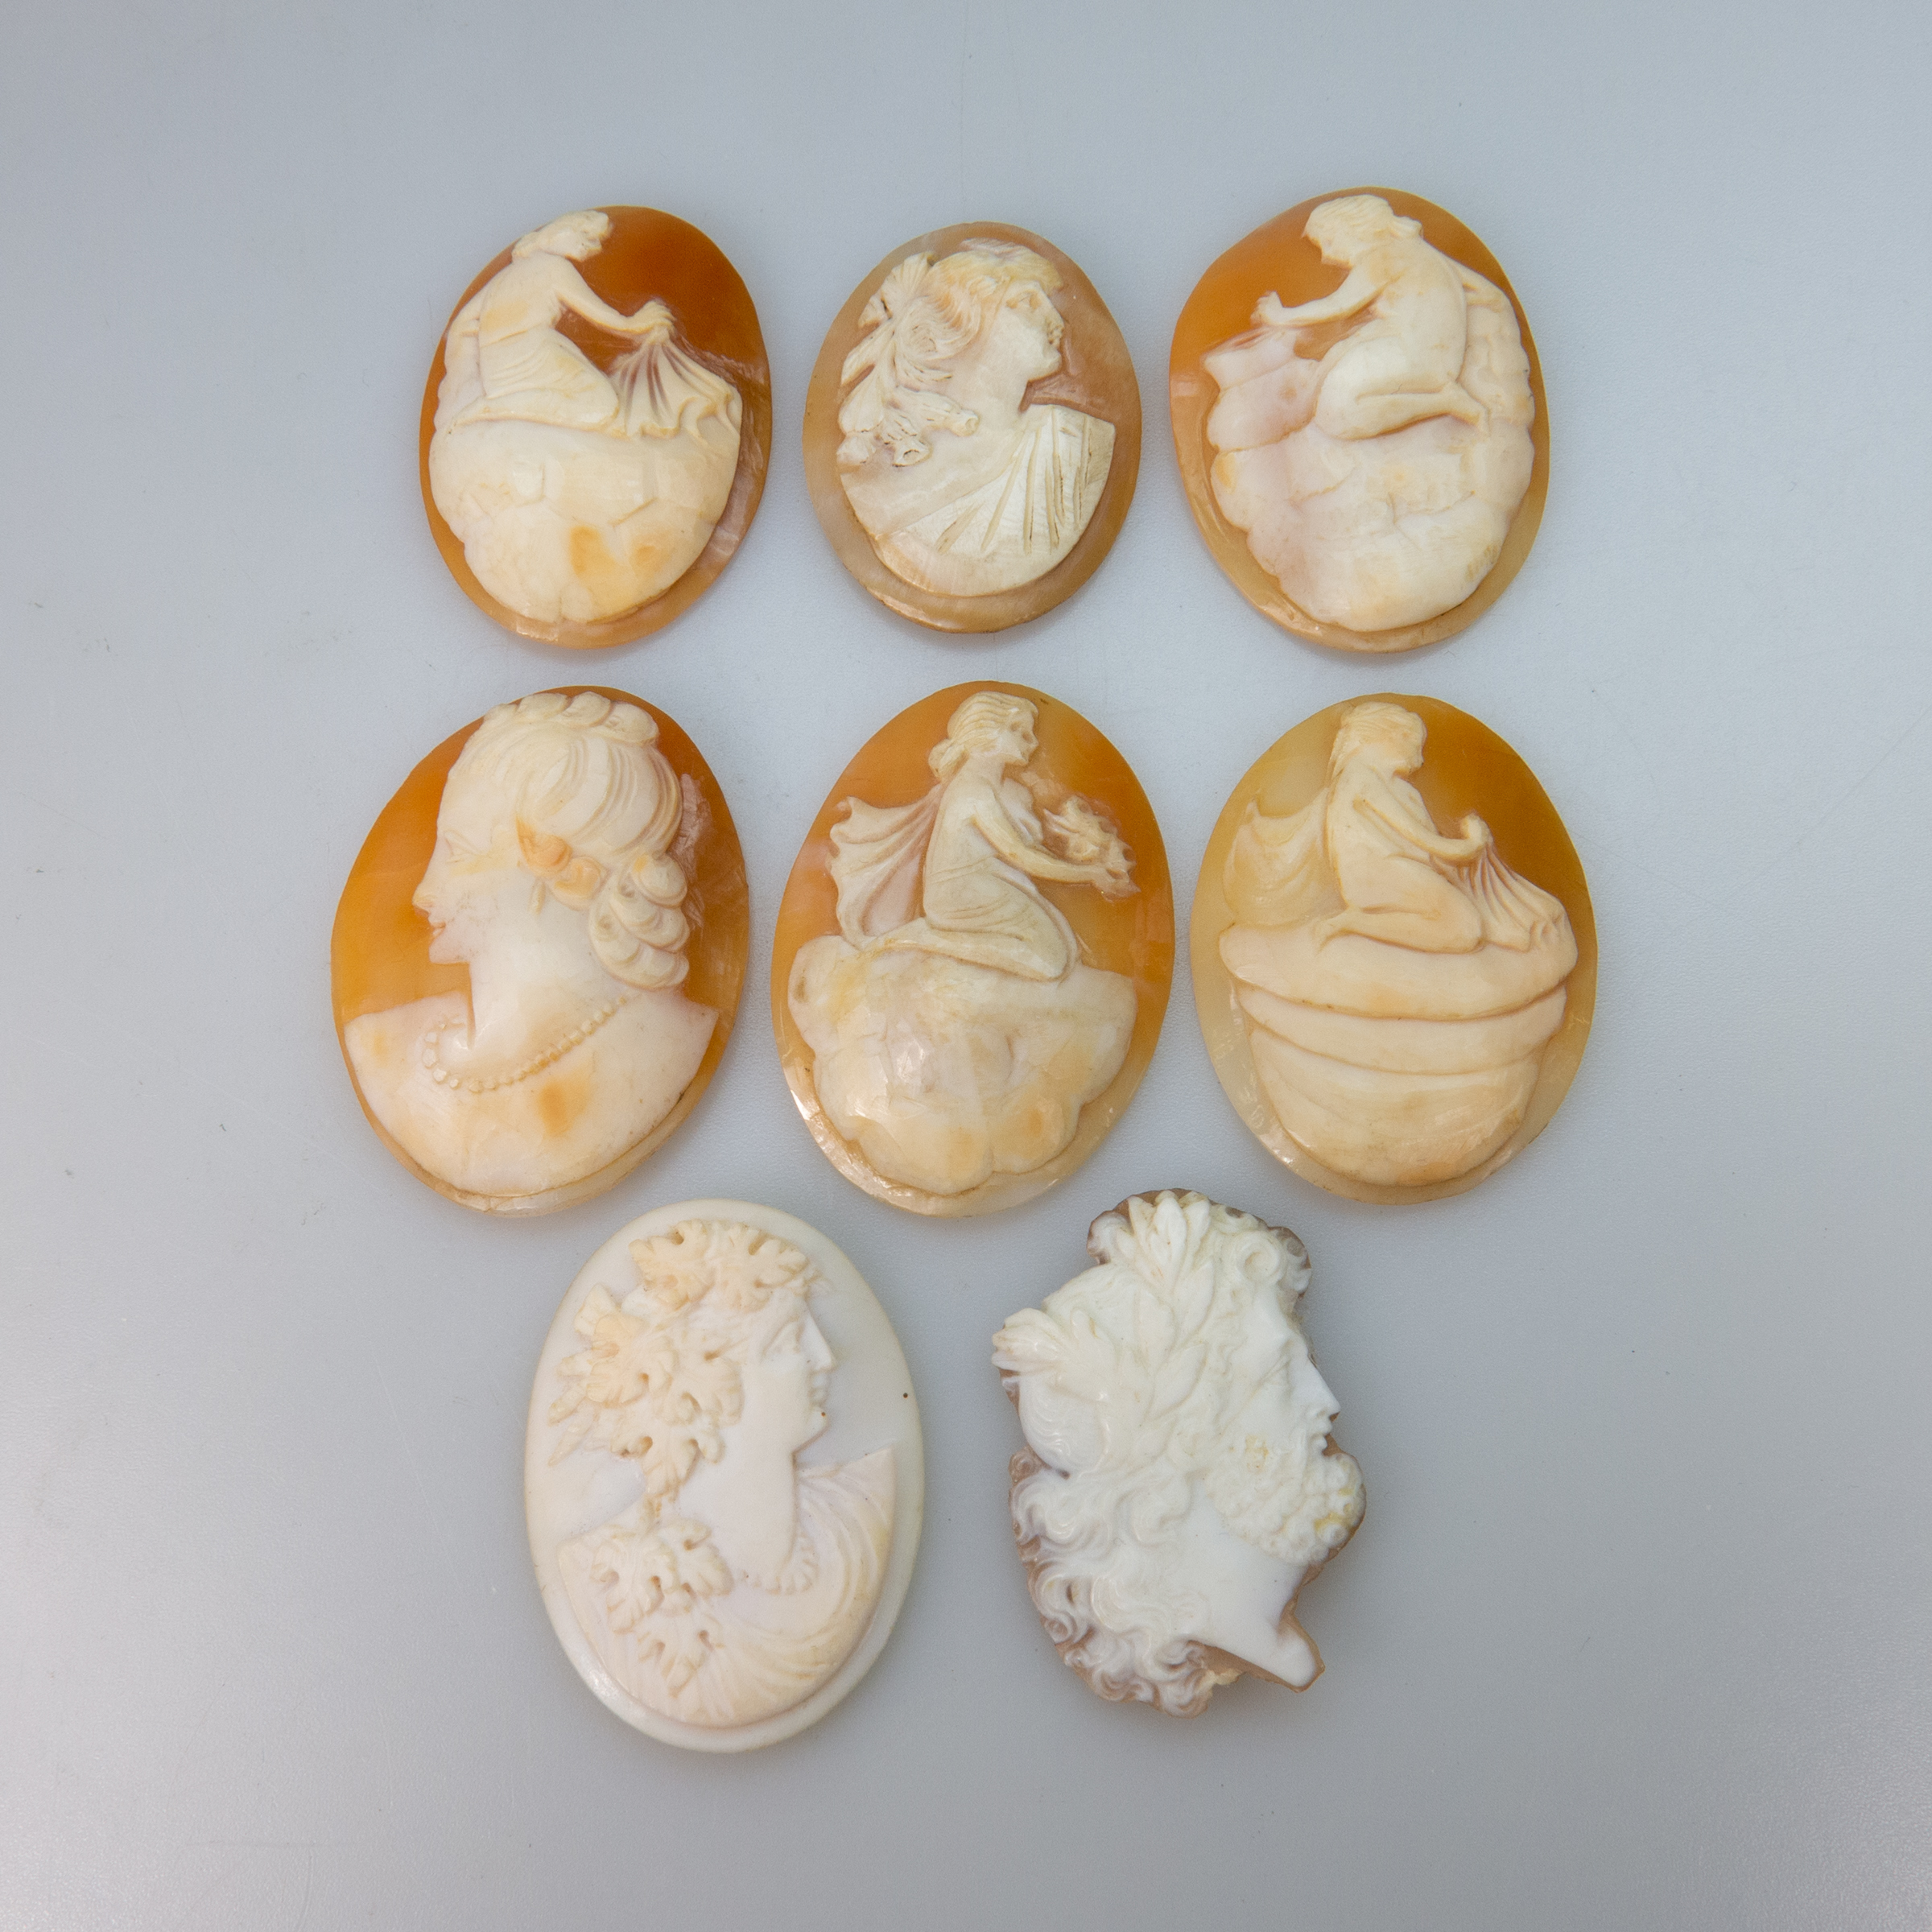 13 Various Carved Shell Cameos